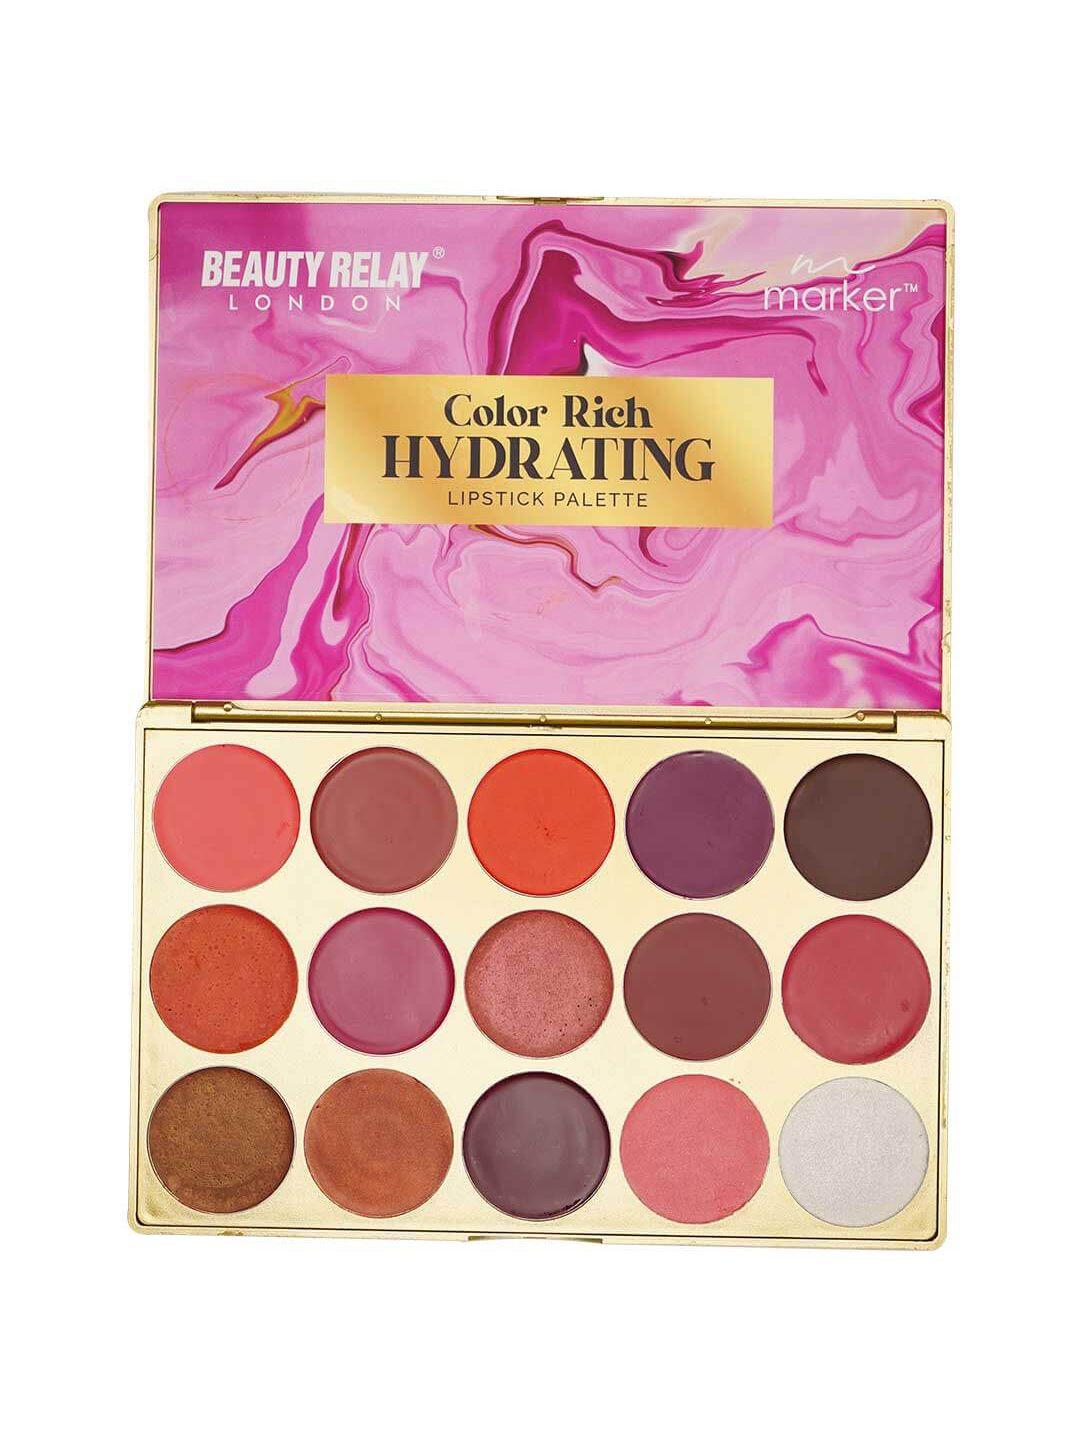 beautyrelay london marker hydrating creamy texture lipstick palette 42 g - color rich